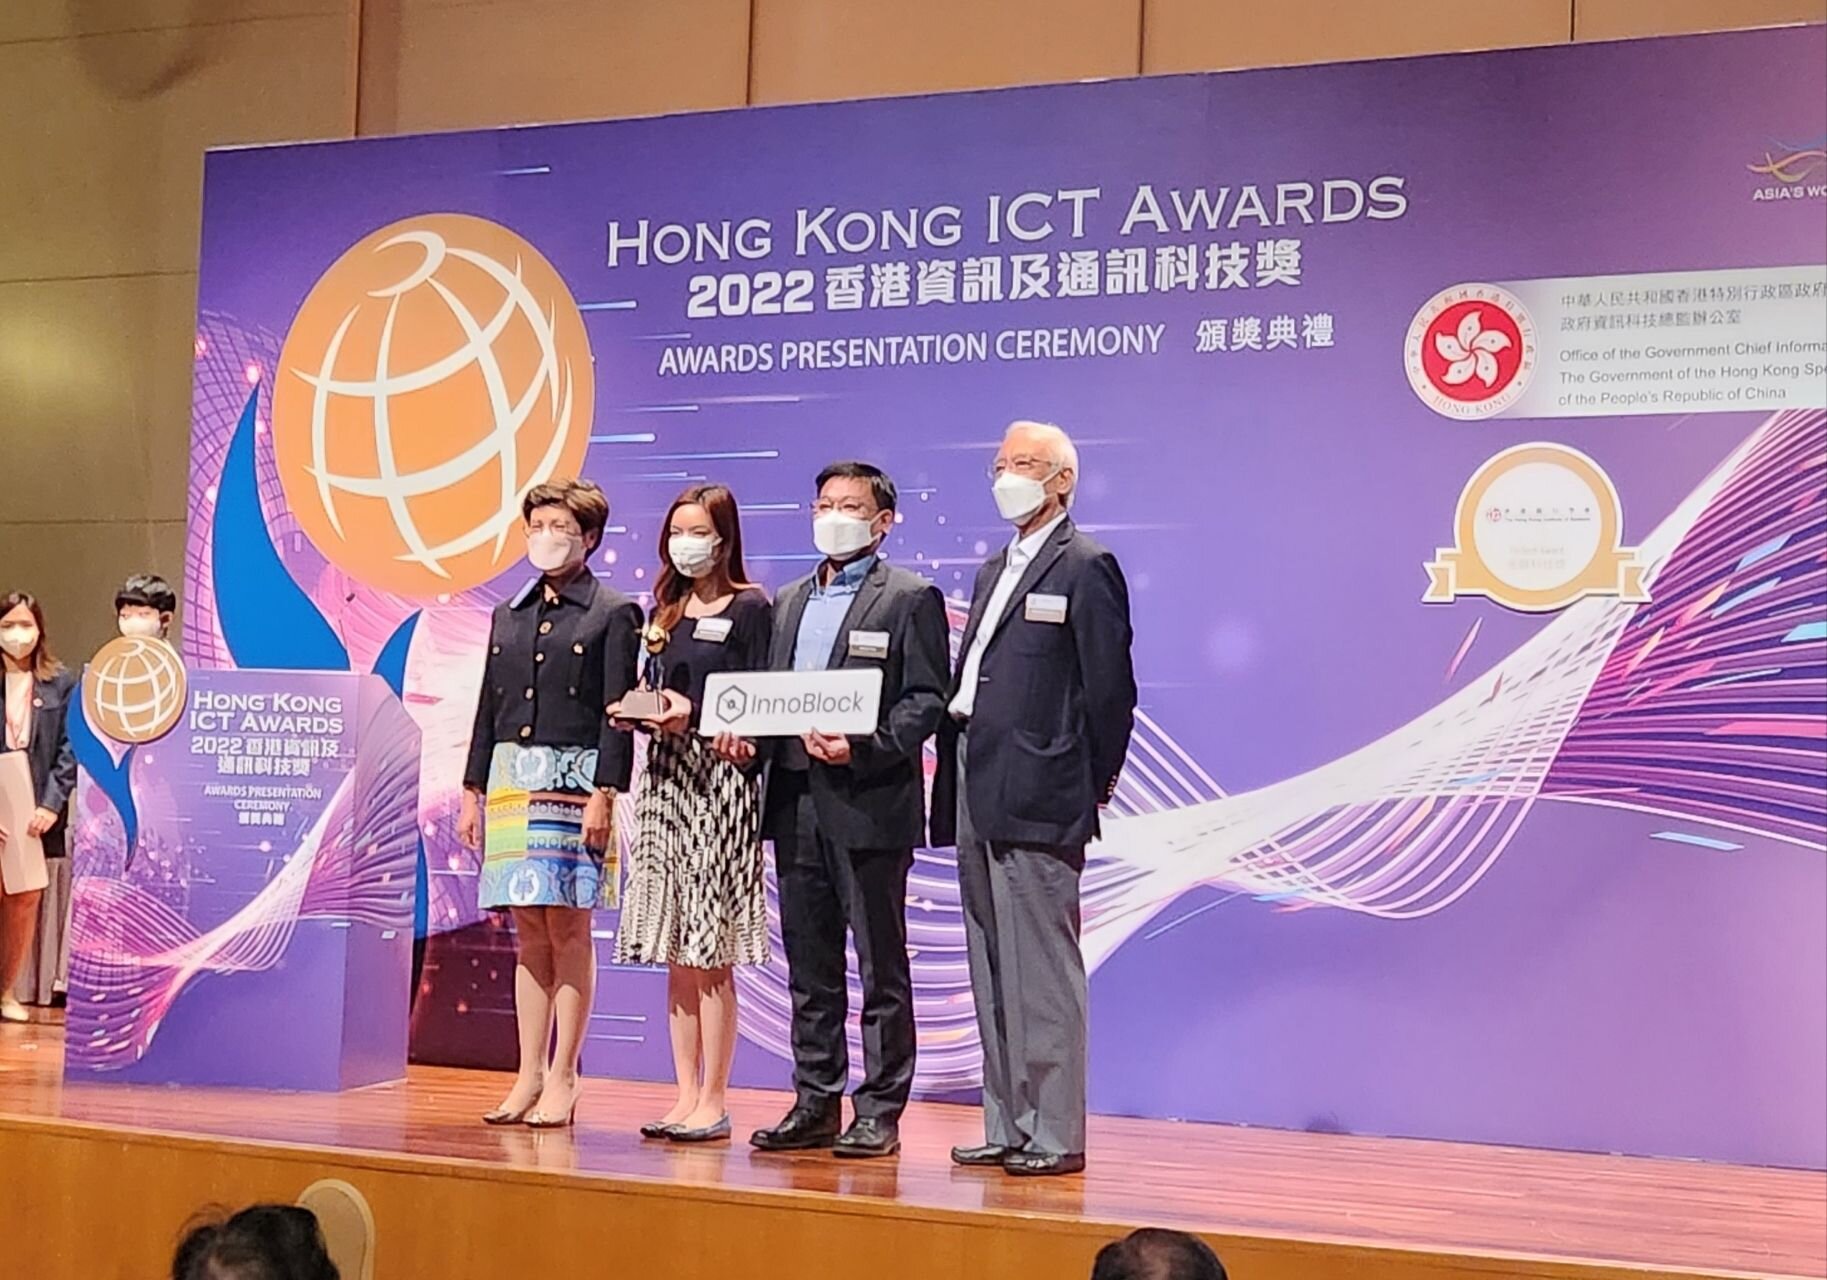 SafeGuardChain® has been awarded in HKICT Award 2022